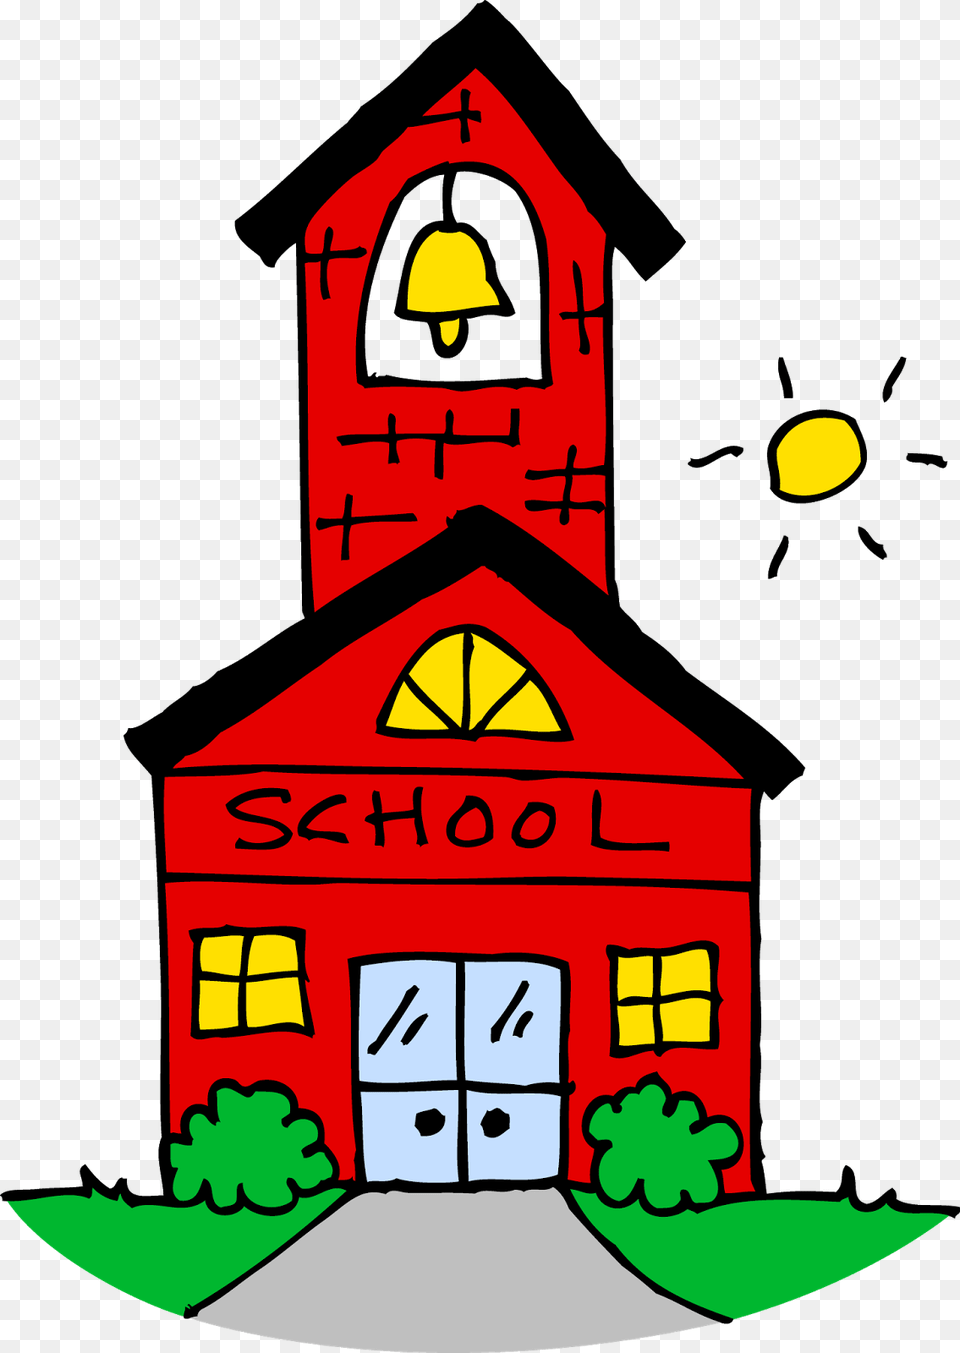 Red Schoolhouse End Of The Year Activities, Architecture, Bell Tower, Building, Tower Png